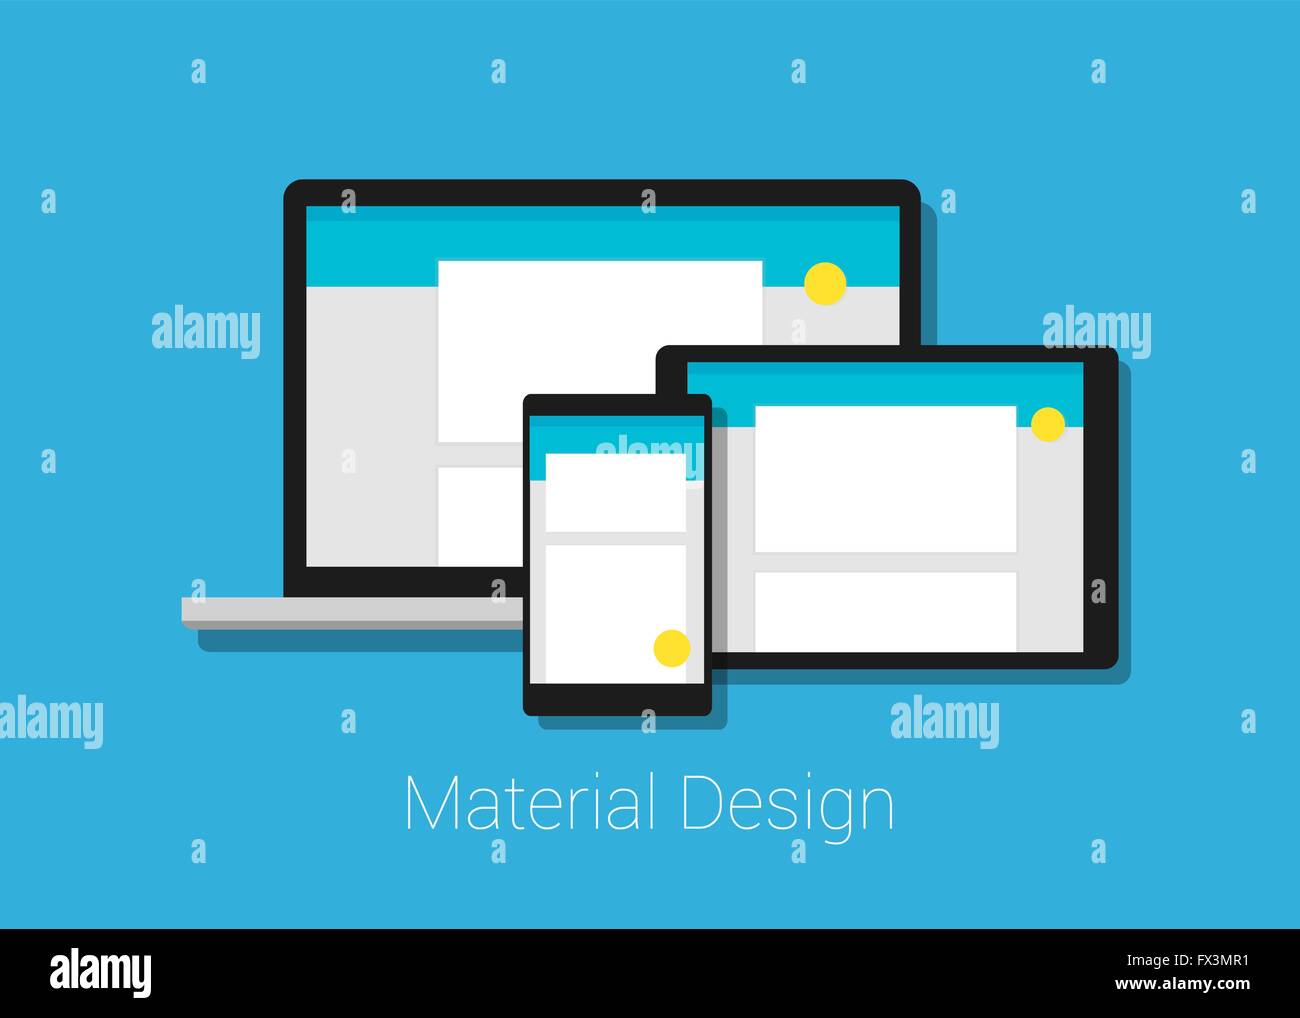 material deign responsive interface layout Stock Vector